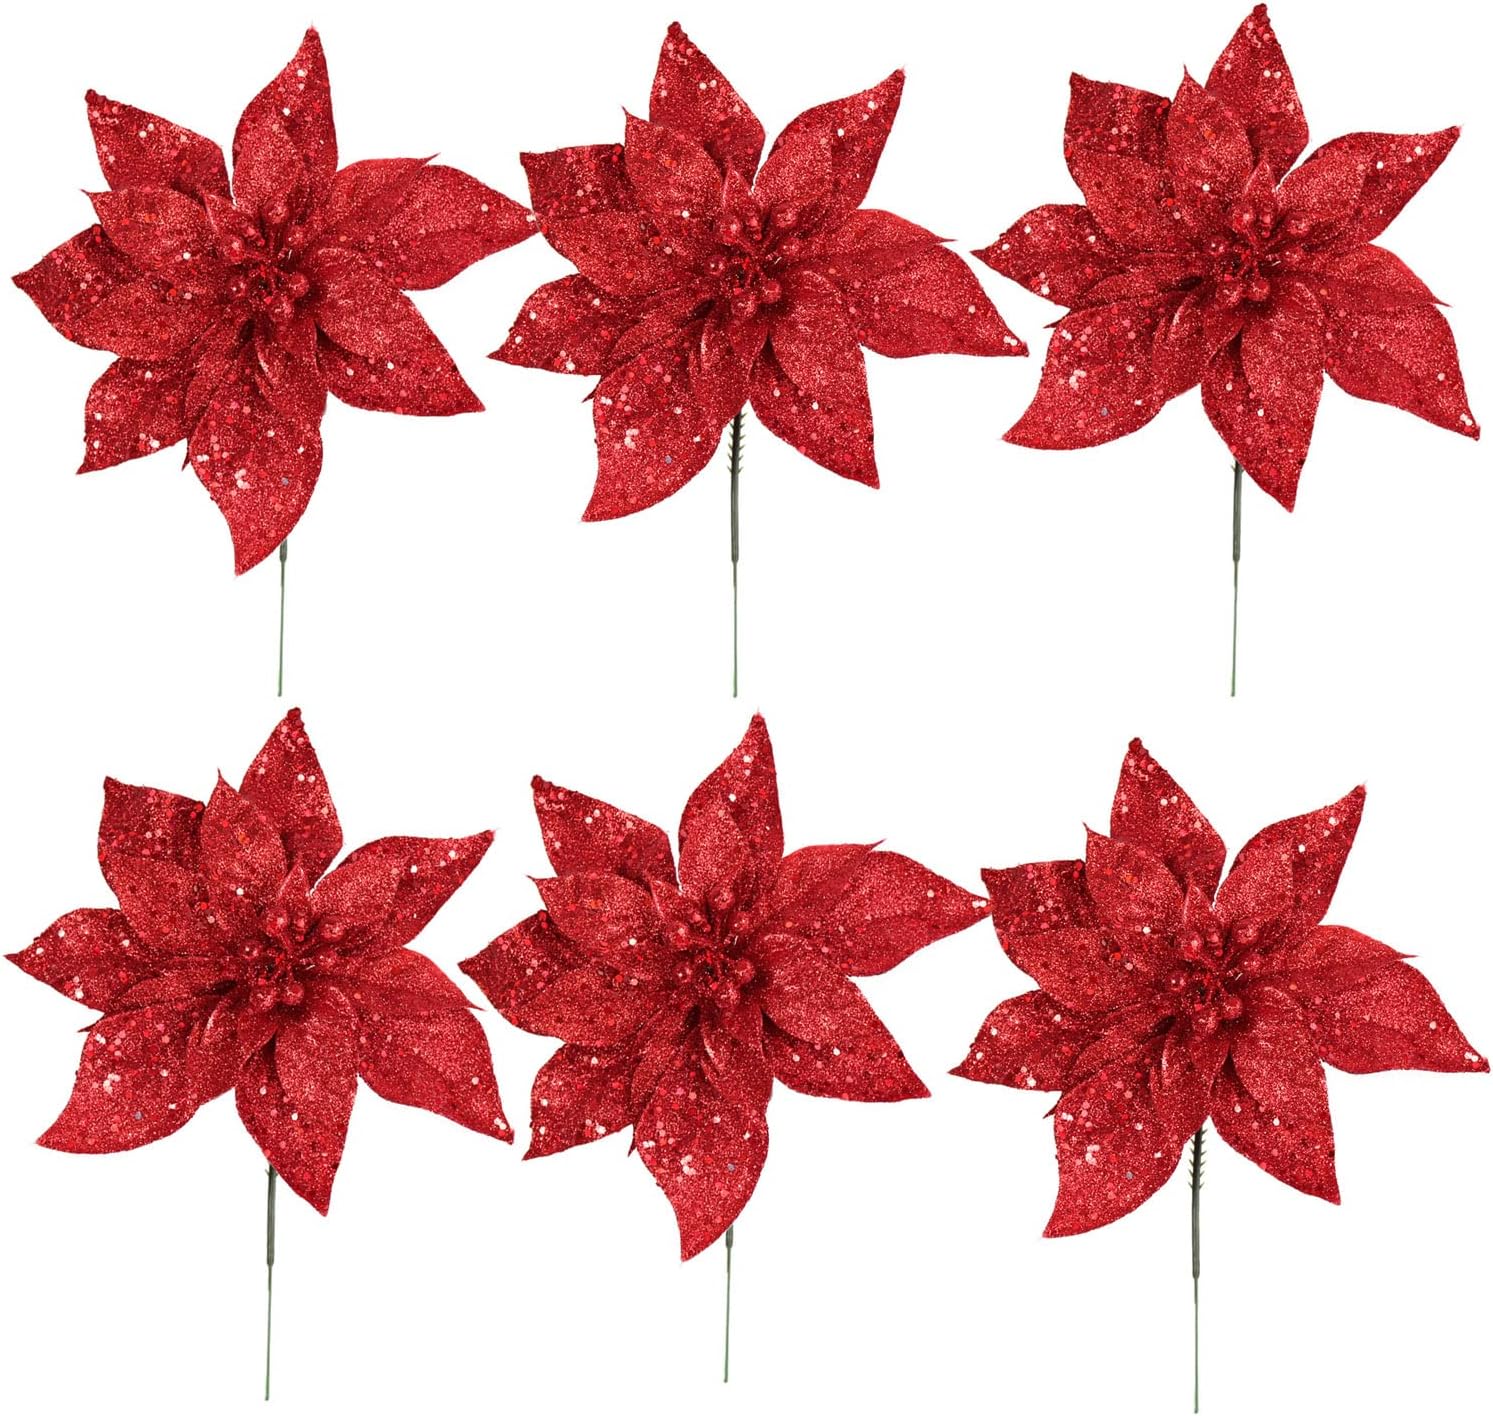 Sparkling Red Glitter Poinsettia Flower Picks | 8.5" Wide | Holiday Xmas Accents | Trees, Wreaths, & Garlands | Gift Wrapping | Christmas Picks | Home & Office Decor (Set of 12)